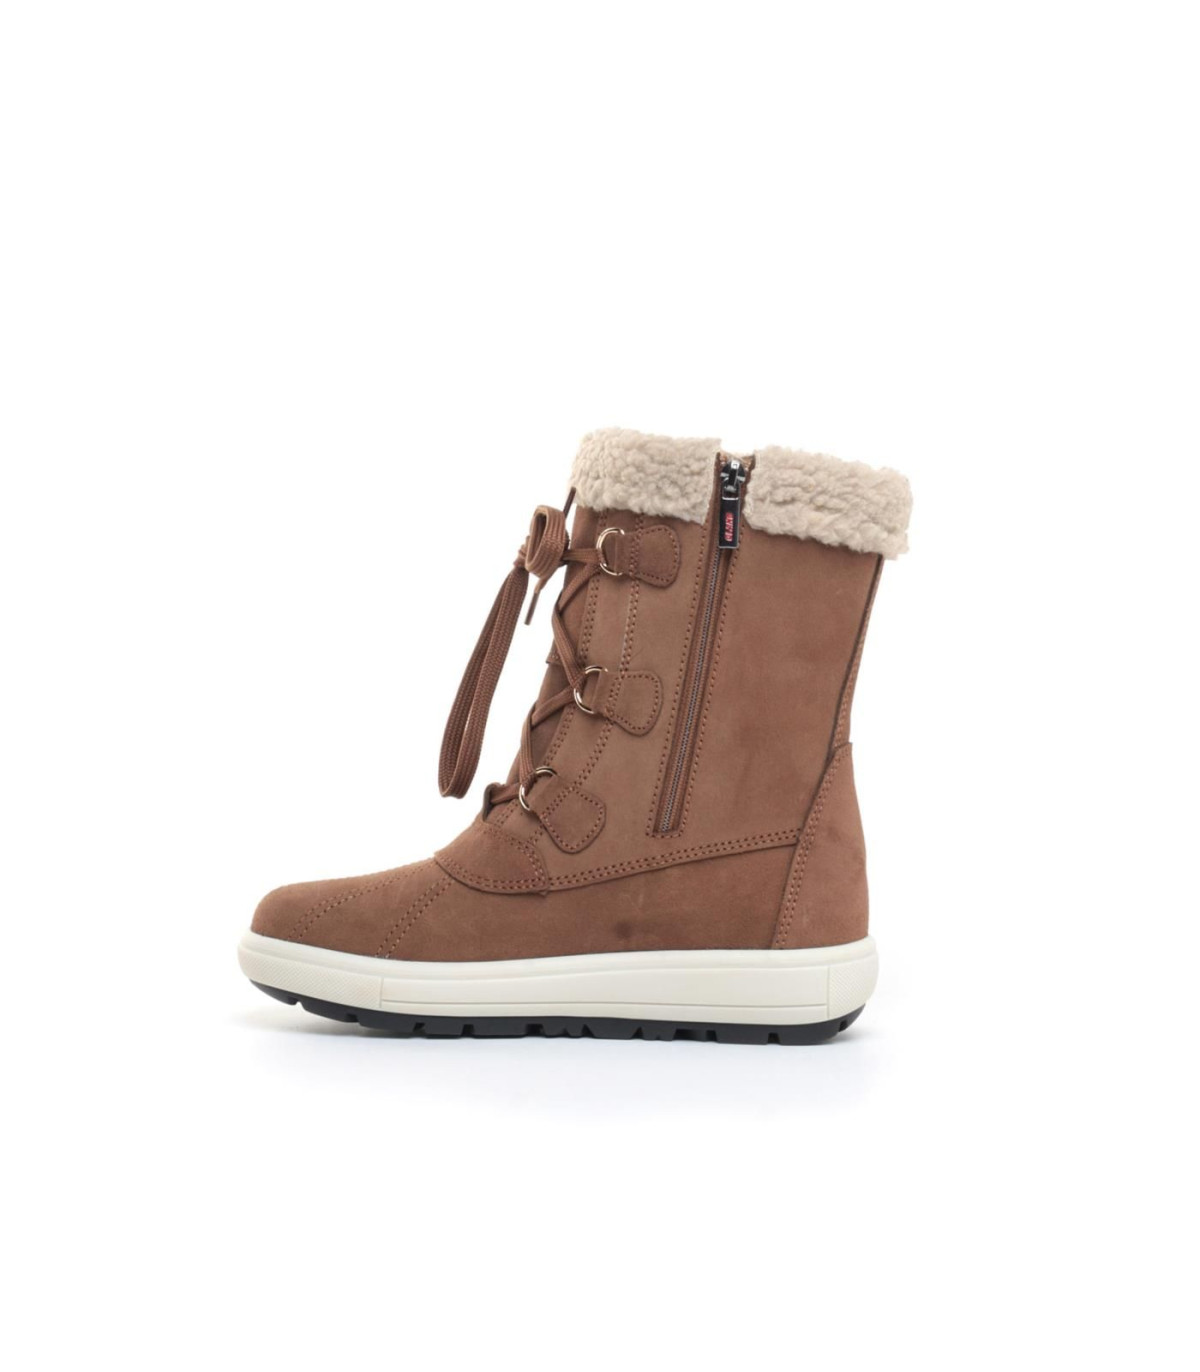 Botas invierno mujer piel impermeable forro - Olang HUPA